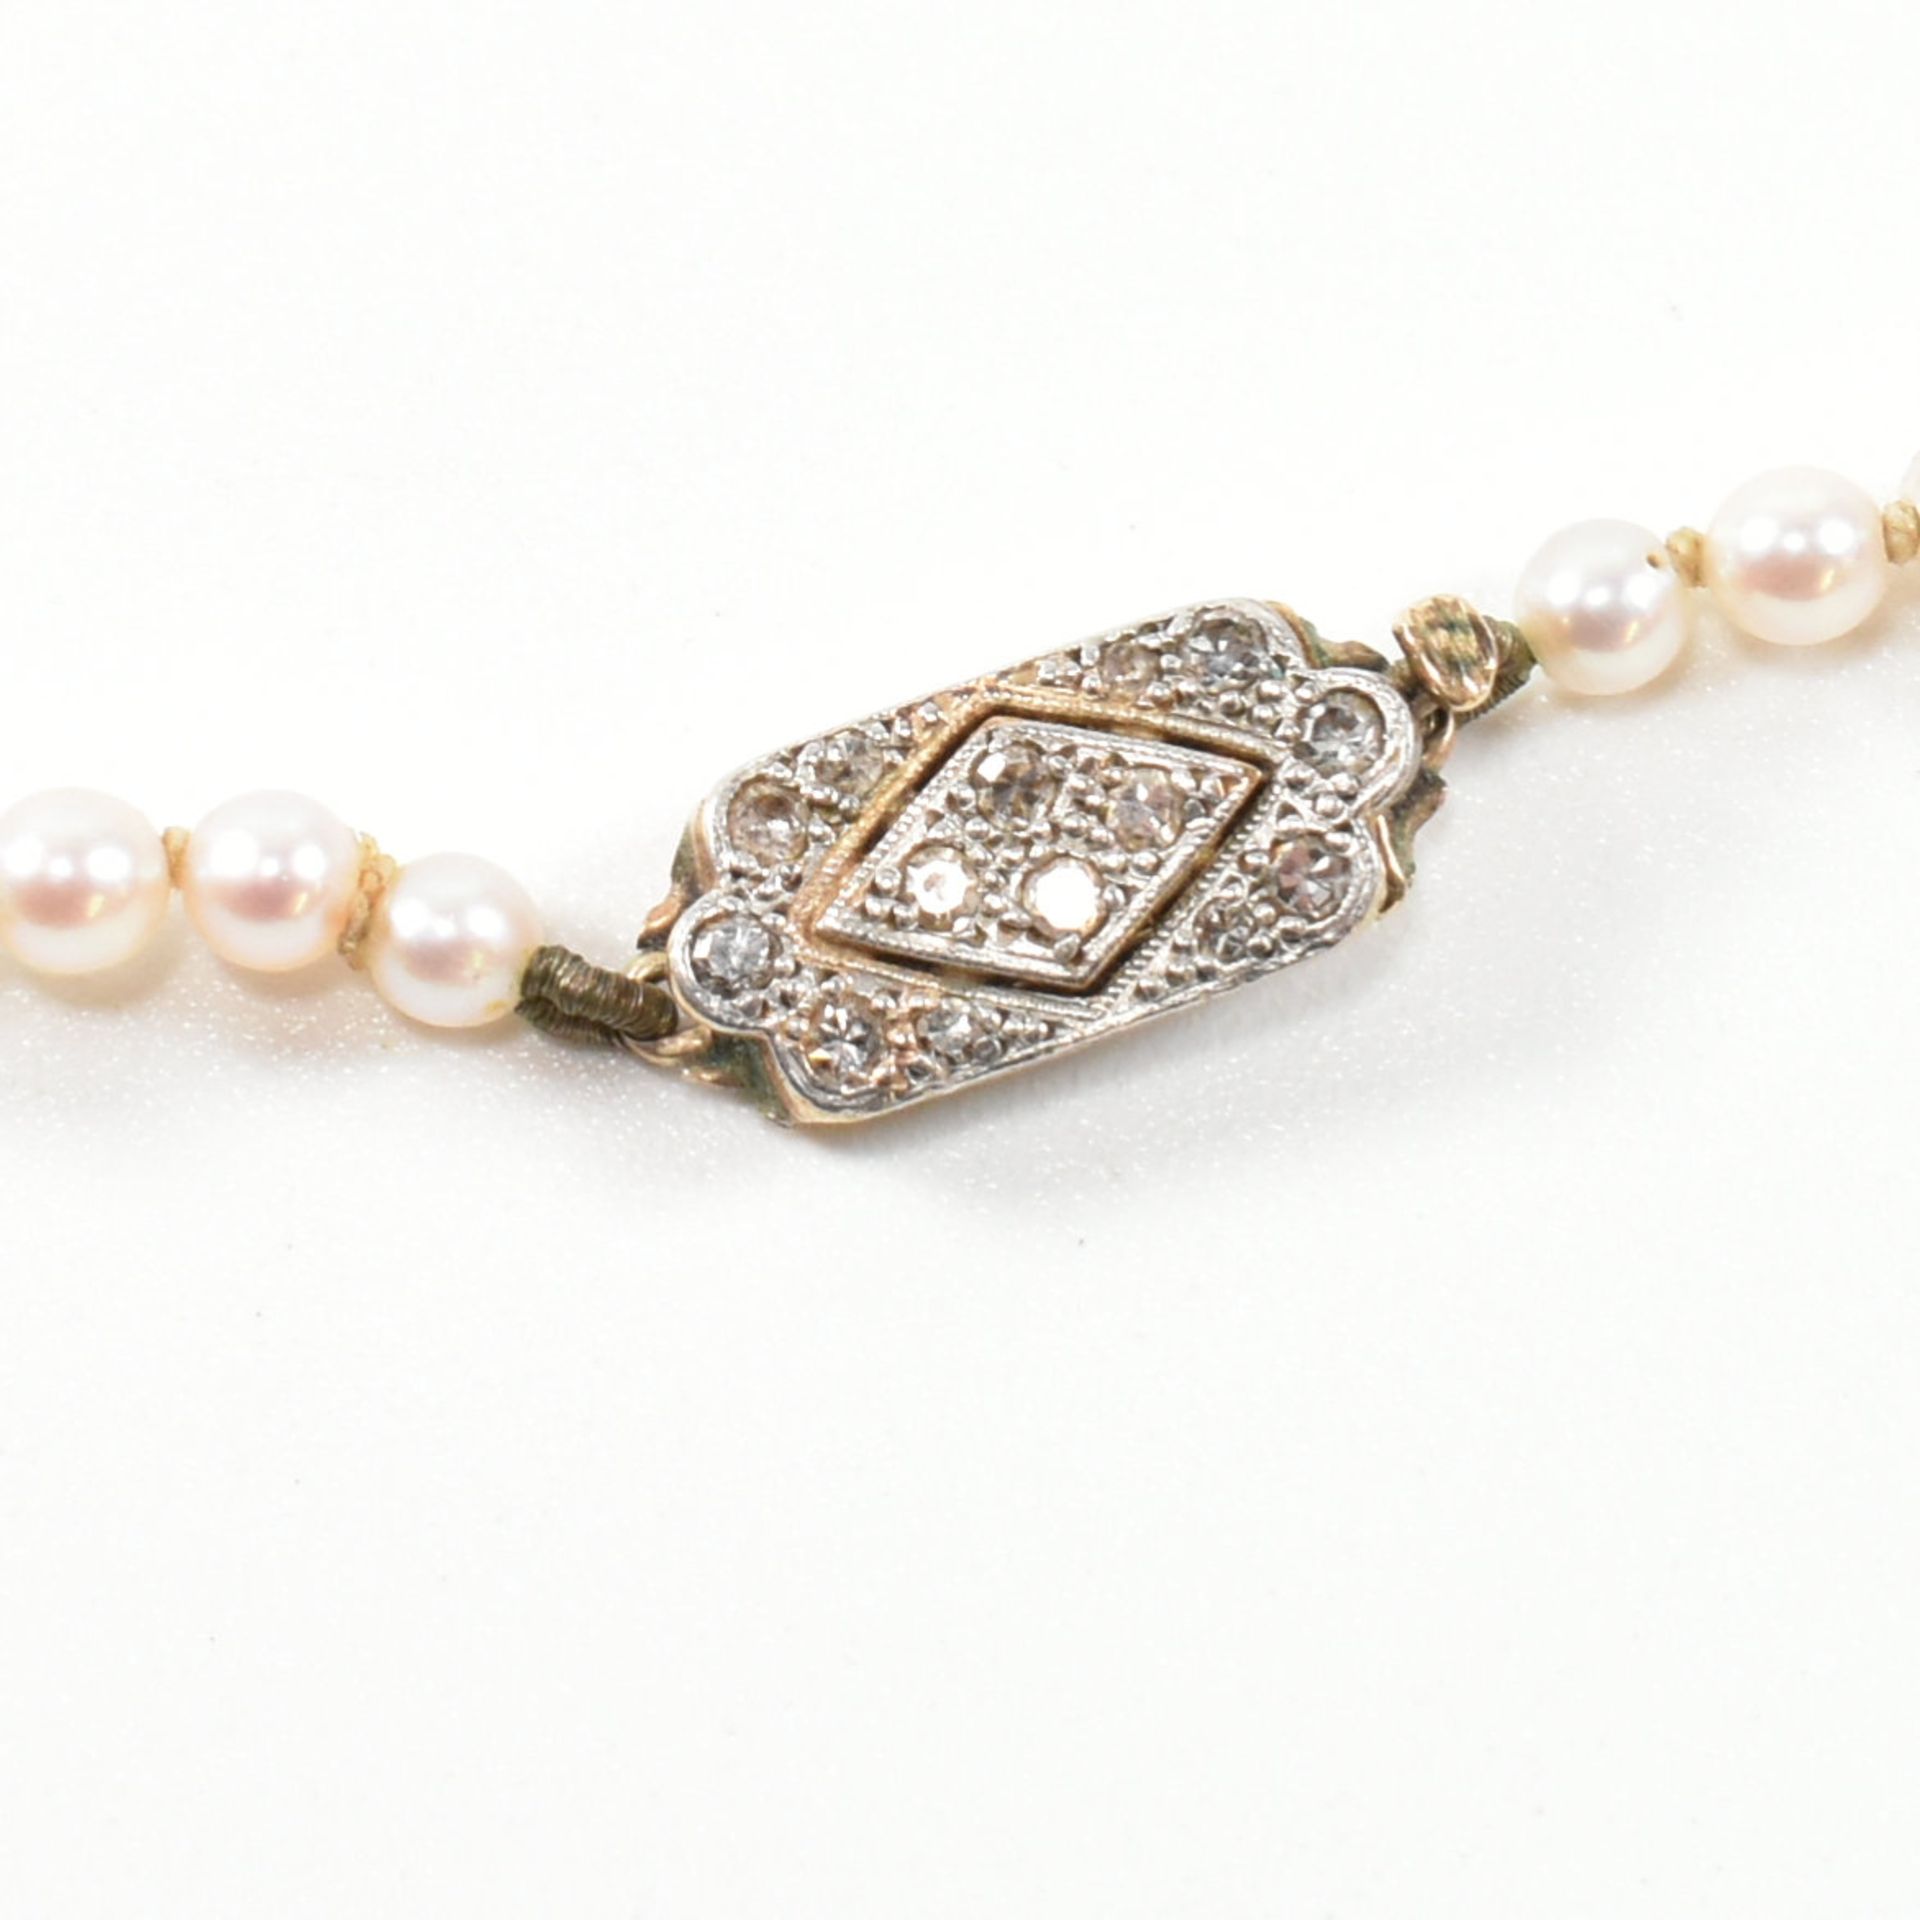 9CT GOLD CULTURED PEARL & DIAMOND NECKLACE - Image 2 of 6